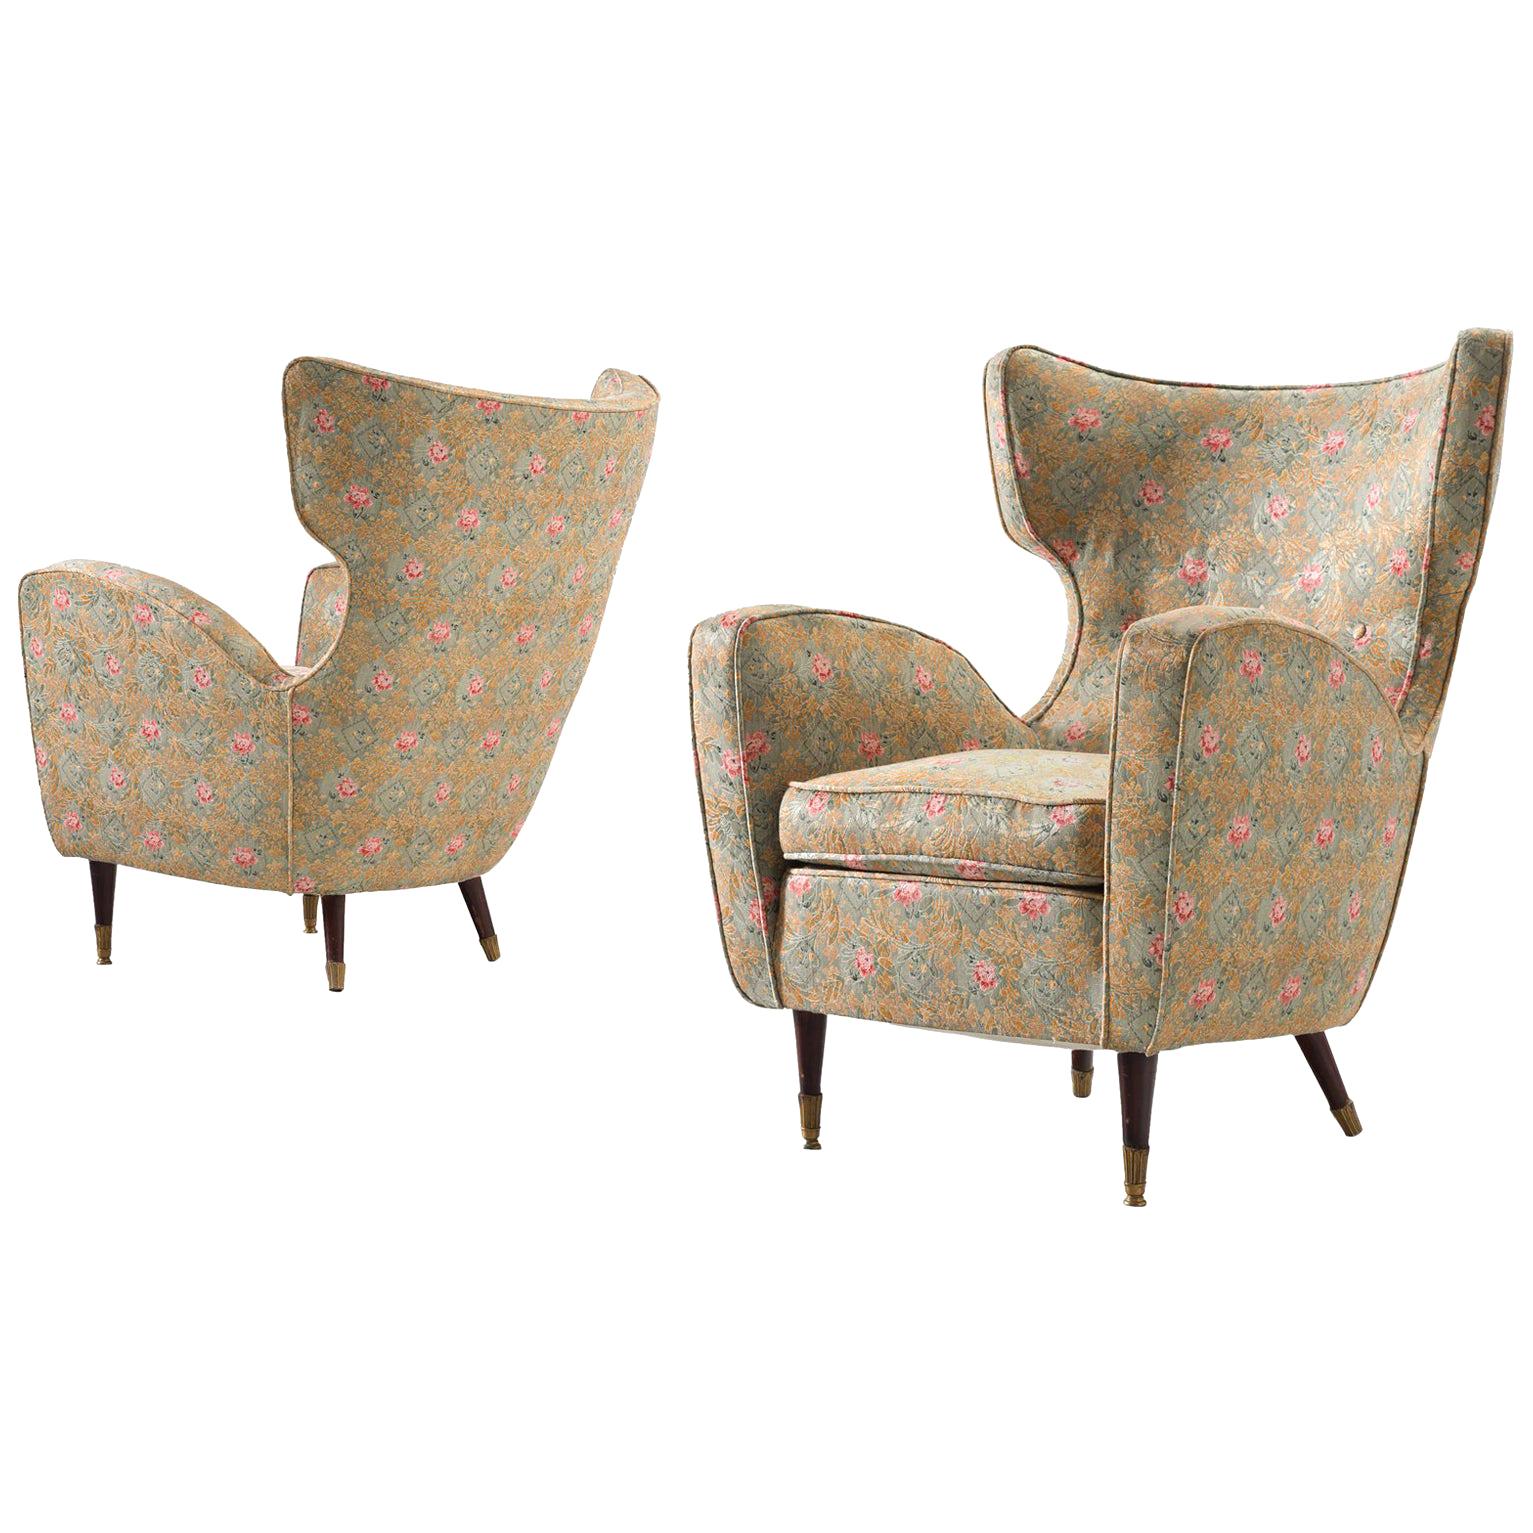 Pair of Italian Armchairs in Floral Upholstery